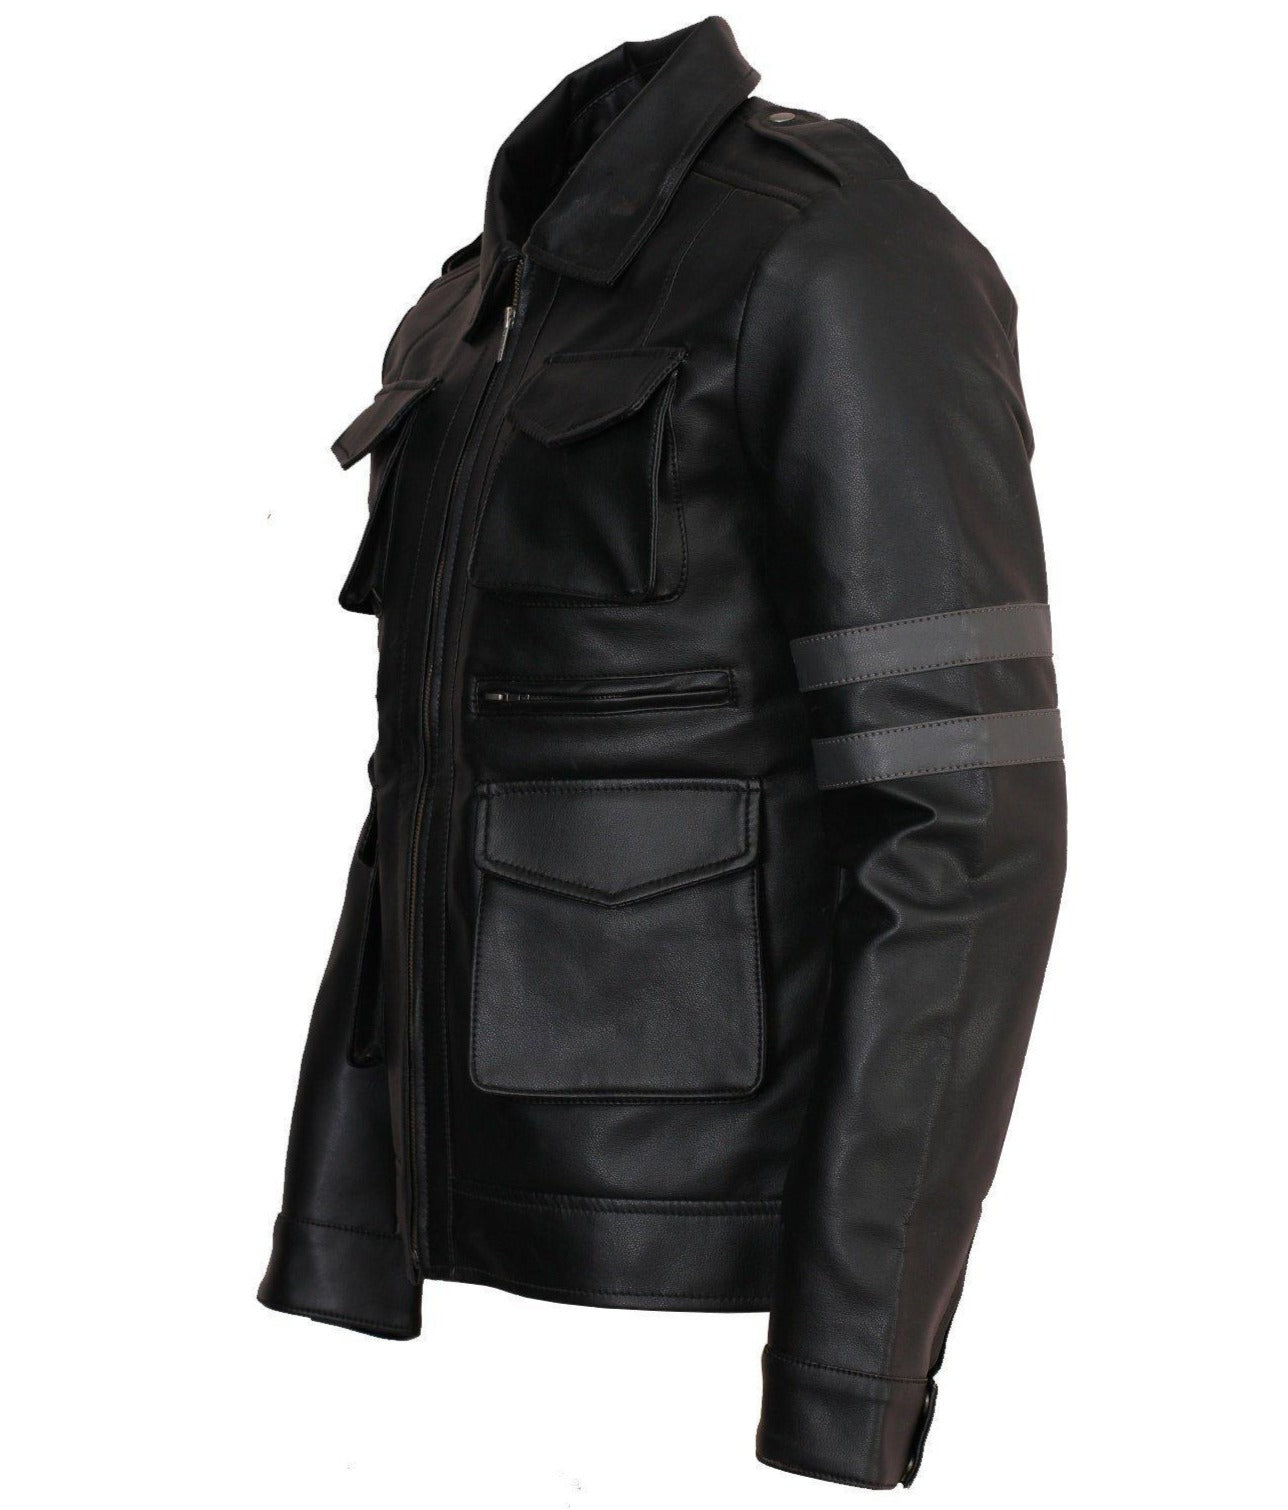  Leon S Kennedy Jacket from Resident Evil 6